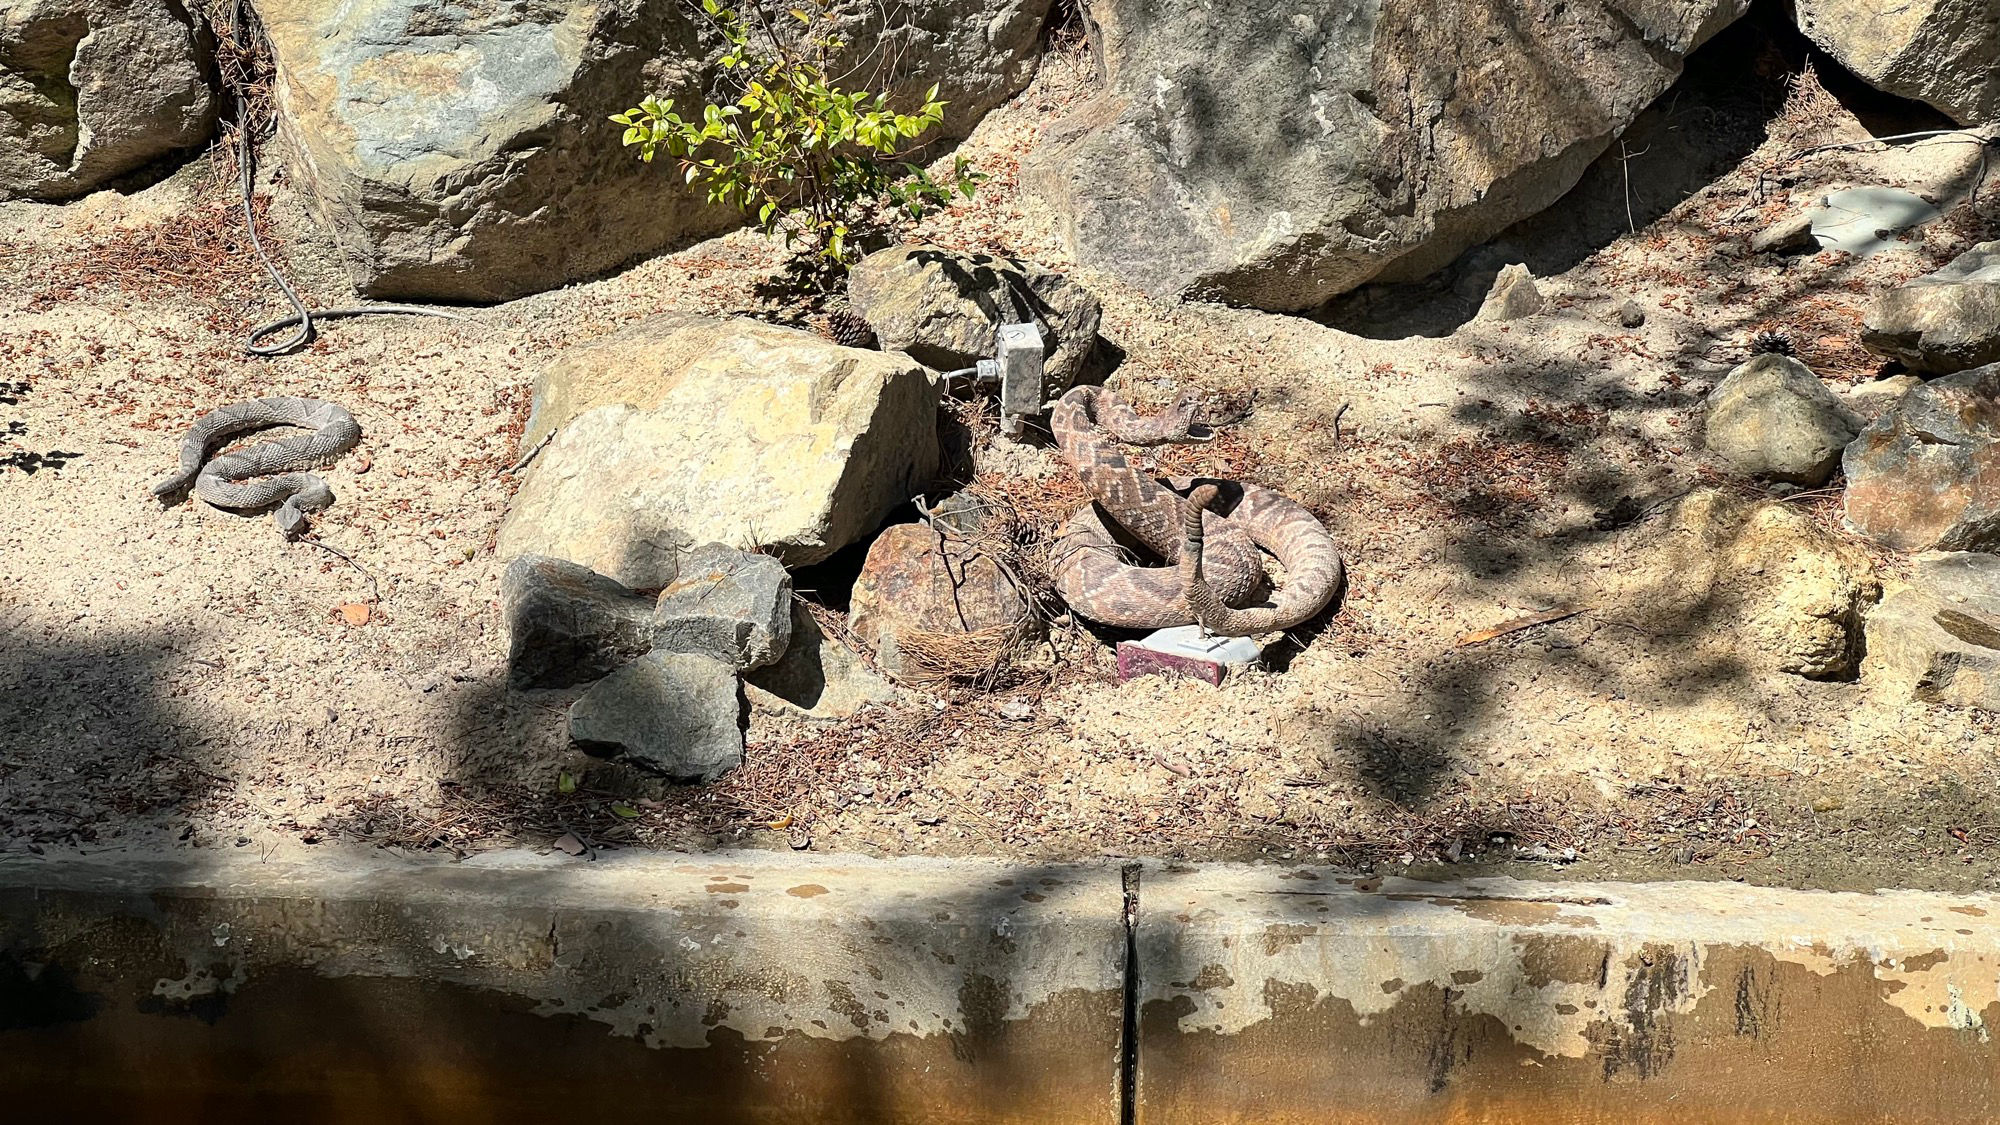 Calico River Rapids Snakes